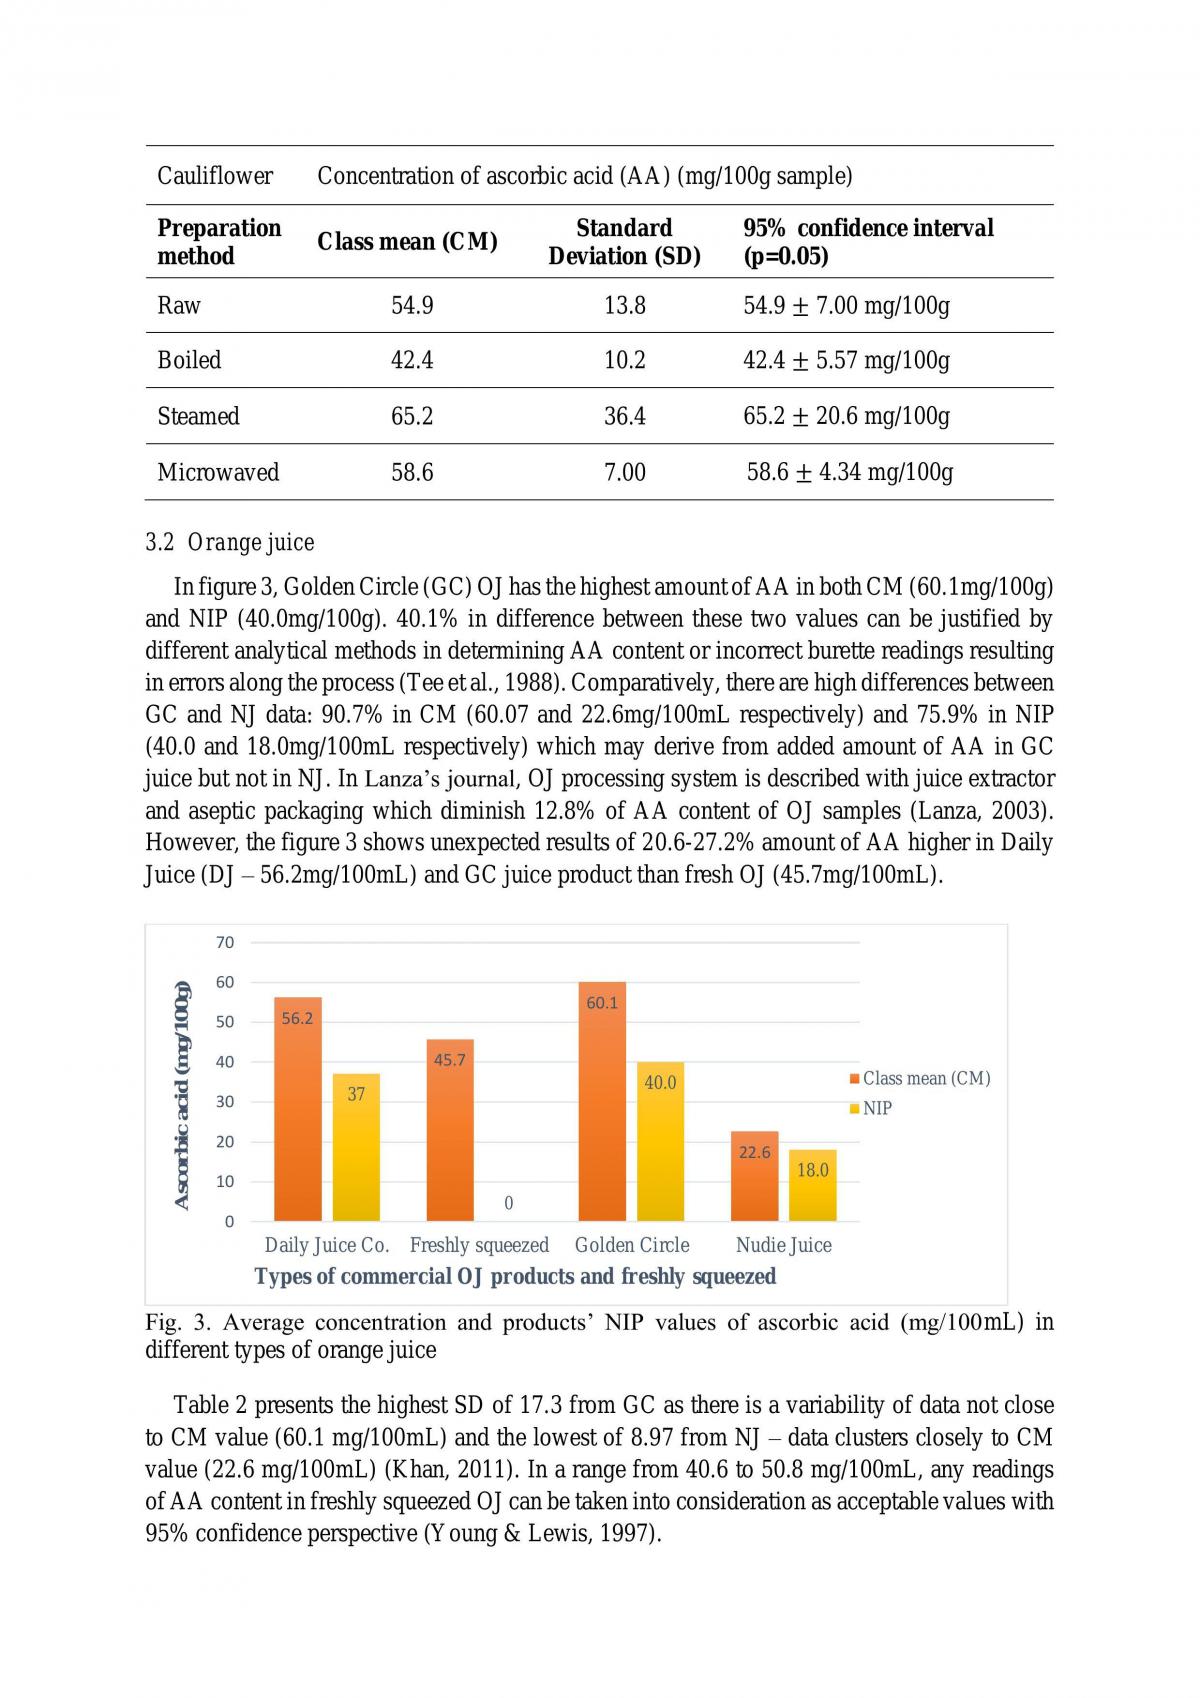 HSN206 Laboratory Report 2 - Page 4